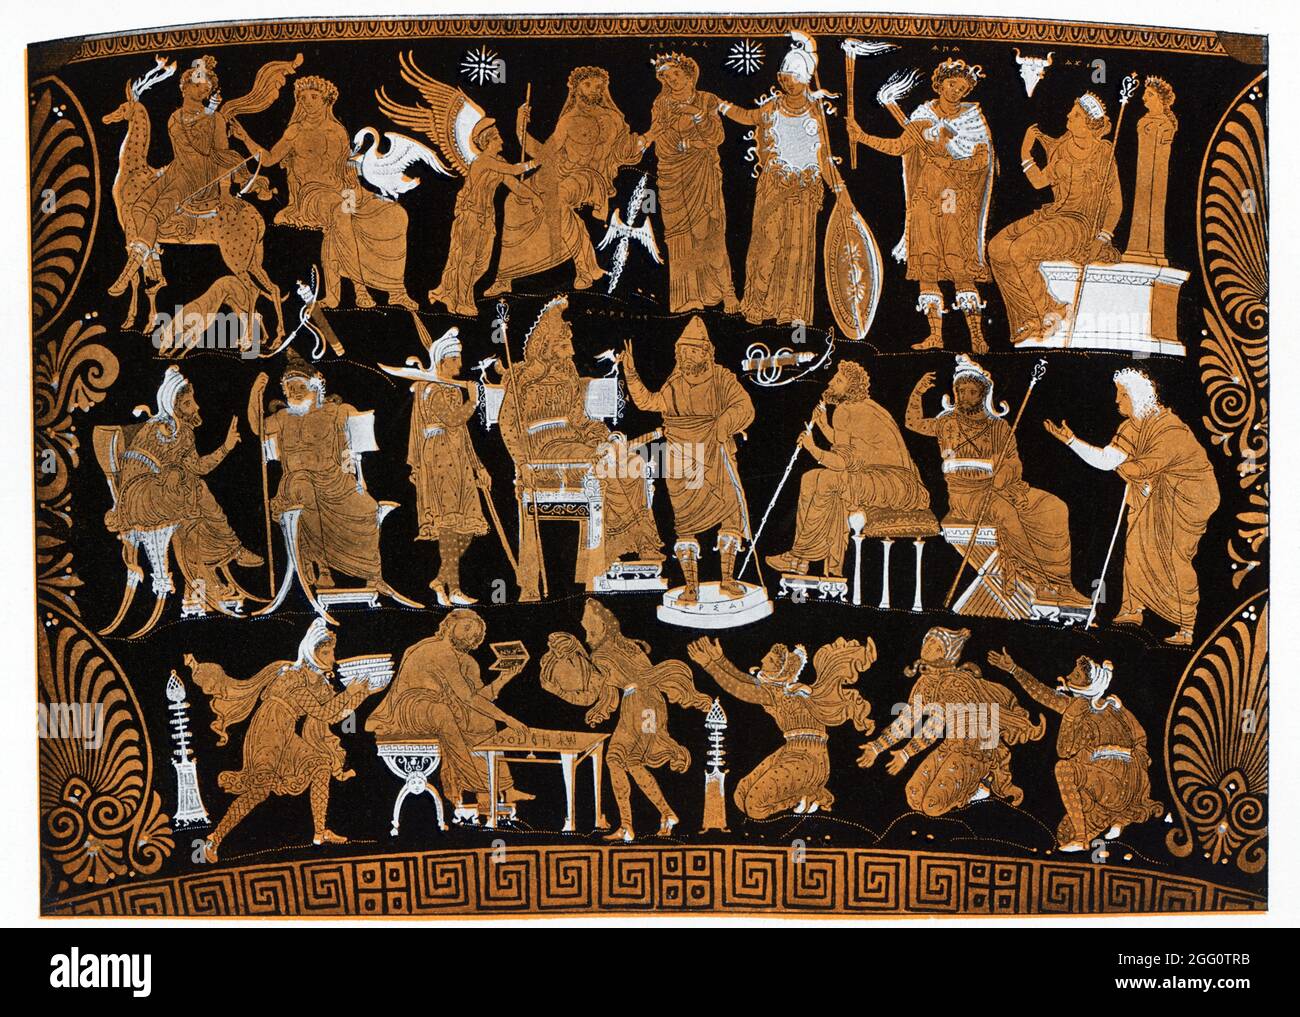 vase ancient hi-res stock and images